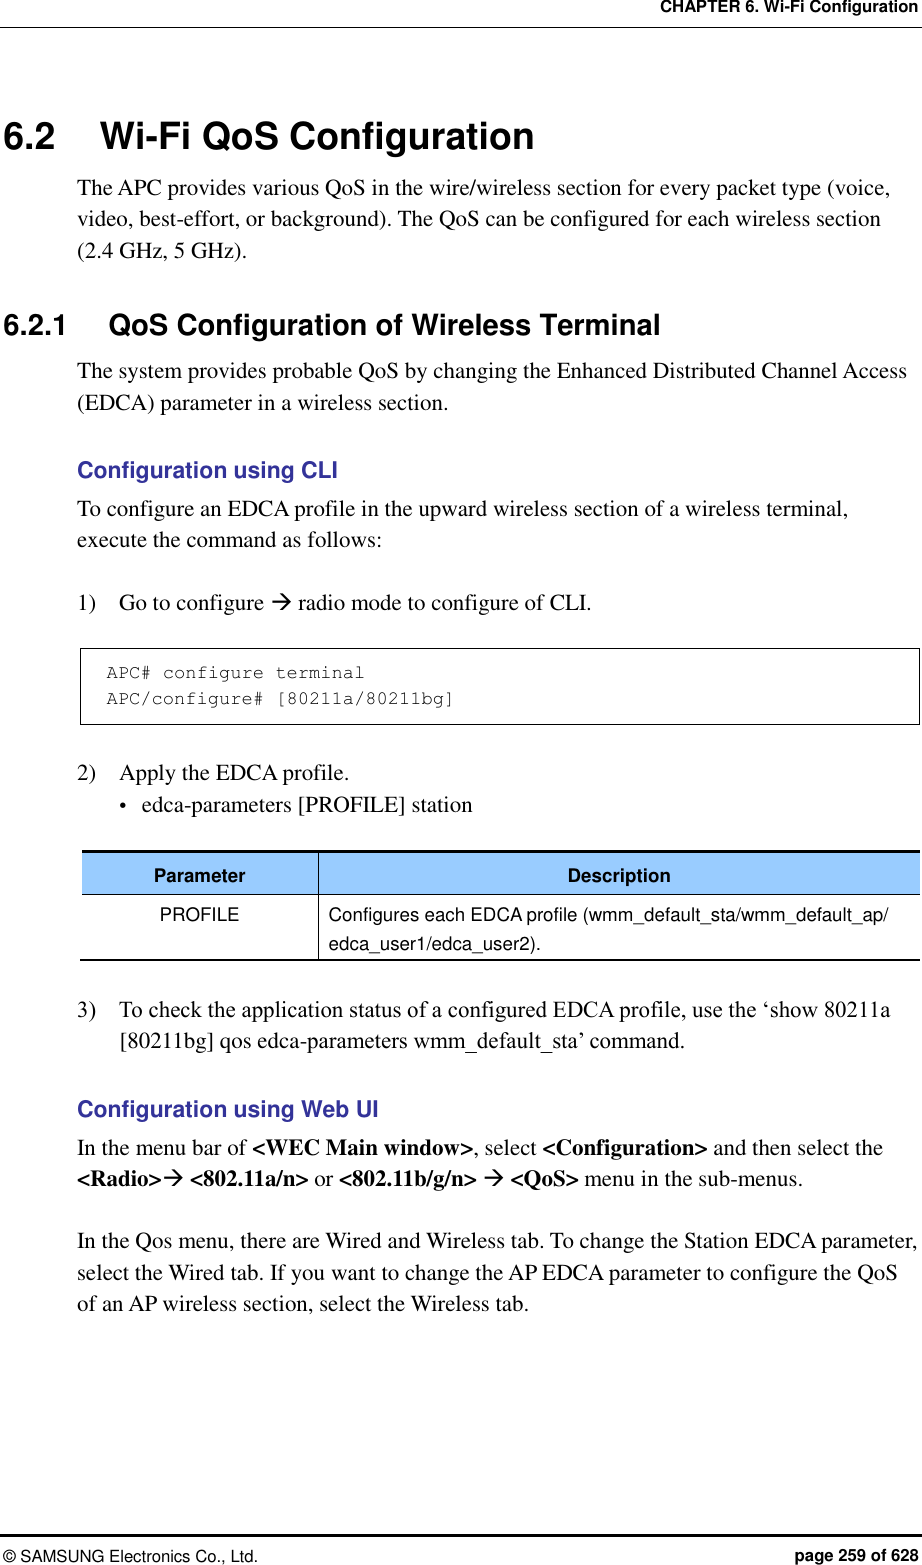 CHAPTER 6. Wi-Fi Configuration ©  SAMSUNG Electronics Co., Ltd.  page 259 of 628 6.2  Wi-Fi QoS Configuration The APC provides various QoS in the wire/wireless section for every packet type (voice, video, best-effort, or background). The QoS can be configured for each wireless section (2.4 GHz, 5 GHz).    6.2.1  QoS Configuration of Wireless Terminal The system provides probable QoS by changing the Enhanced Distributed Channel Access (EDCA) parameter in a wireless section.    Configuration using CLI To configure an EDCA profile in the upward wireless section of a wireless terminal, execute the command as follows:  1)    Go to configure  radio mode to configure of CLI.  APC# configure terminal APC/configure# [80211a/80211bg]  2)    Apply the EDCA profile.  edca-parameters [PROFILE] station  Parameter Description PROFILE Configures each EDCA profile (wmm_default_sta/wmm_default_ap/ edca_user1/edca_user2).  3)    To check the application status of a configured EDCA profile, use the ‘show 80211a [80211bg] qos edca-parameters wmm_default_sta’ command.  Configuration using Web UI In the menu bar of &lt;WEC Main window&gt;, select &lt;Configuration&gt; and then select the &lt;Radio&gt; &lt;802.11a/n&gt; or &lt;802.11b/g/n&gt;  &lt;QoS&gt; menu in the sub-menus.  In the Qos menu, there are Wired and Wireless tab. To change the Station EDCA parameter, select the Wired tab. If you want to change the AP EDCA parameter to configure the QoS of an AP wireless section, select the Wireless tab.  